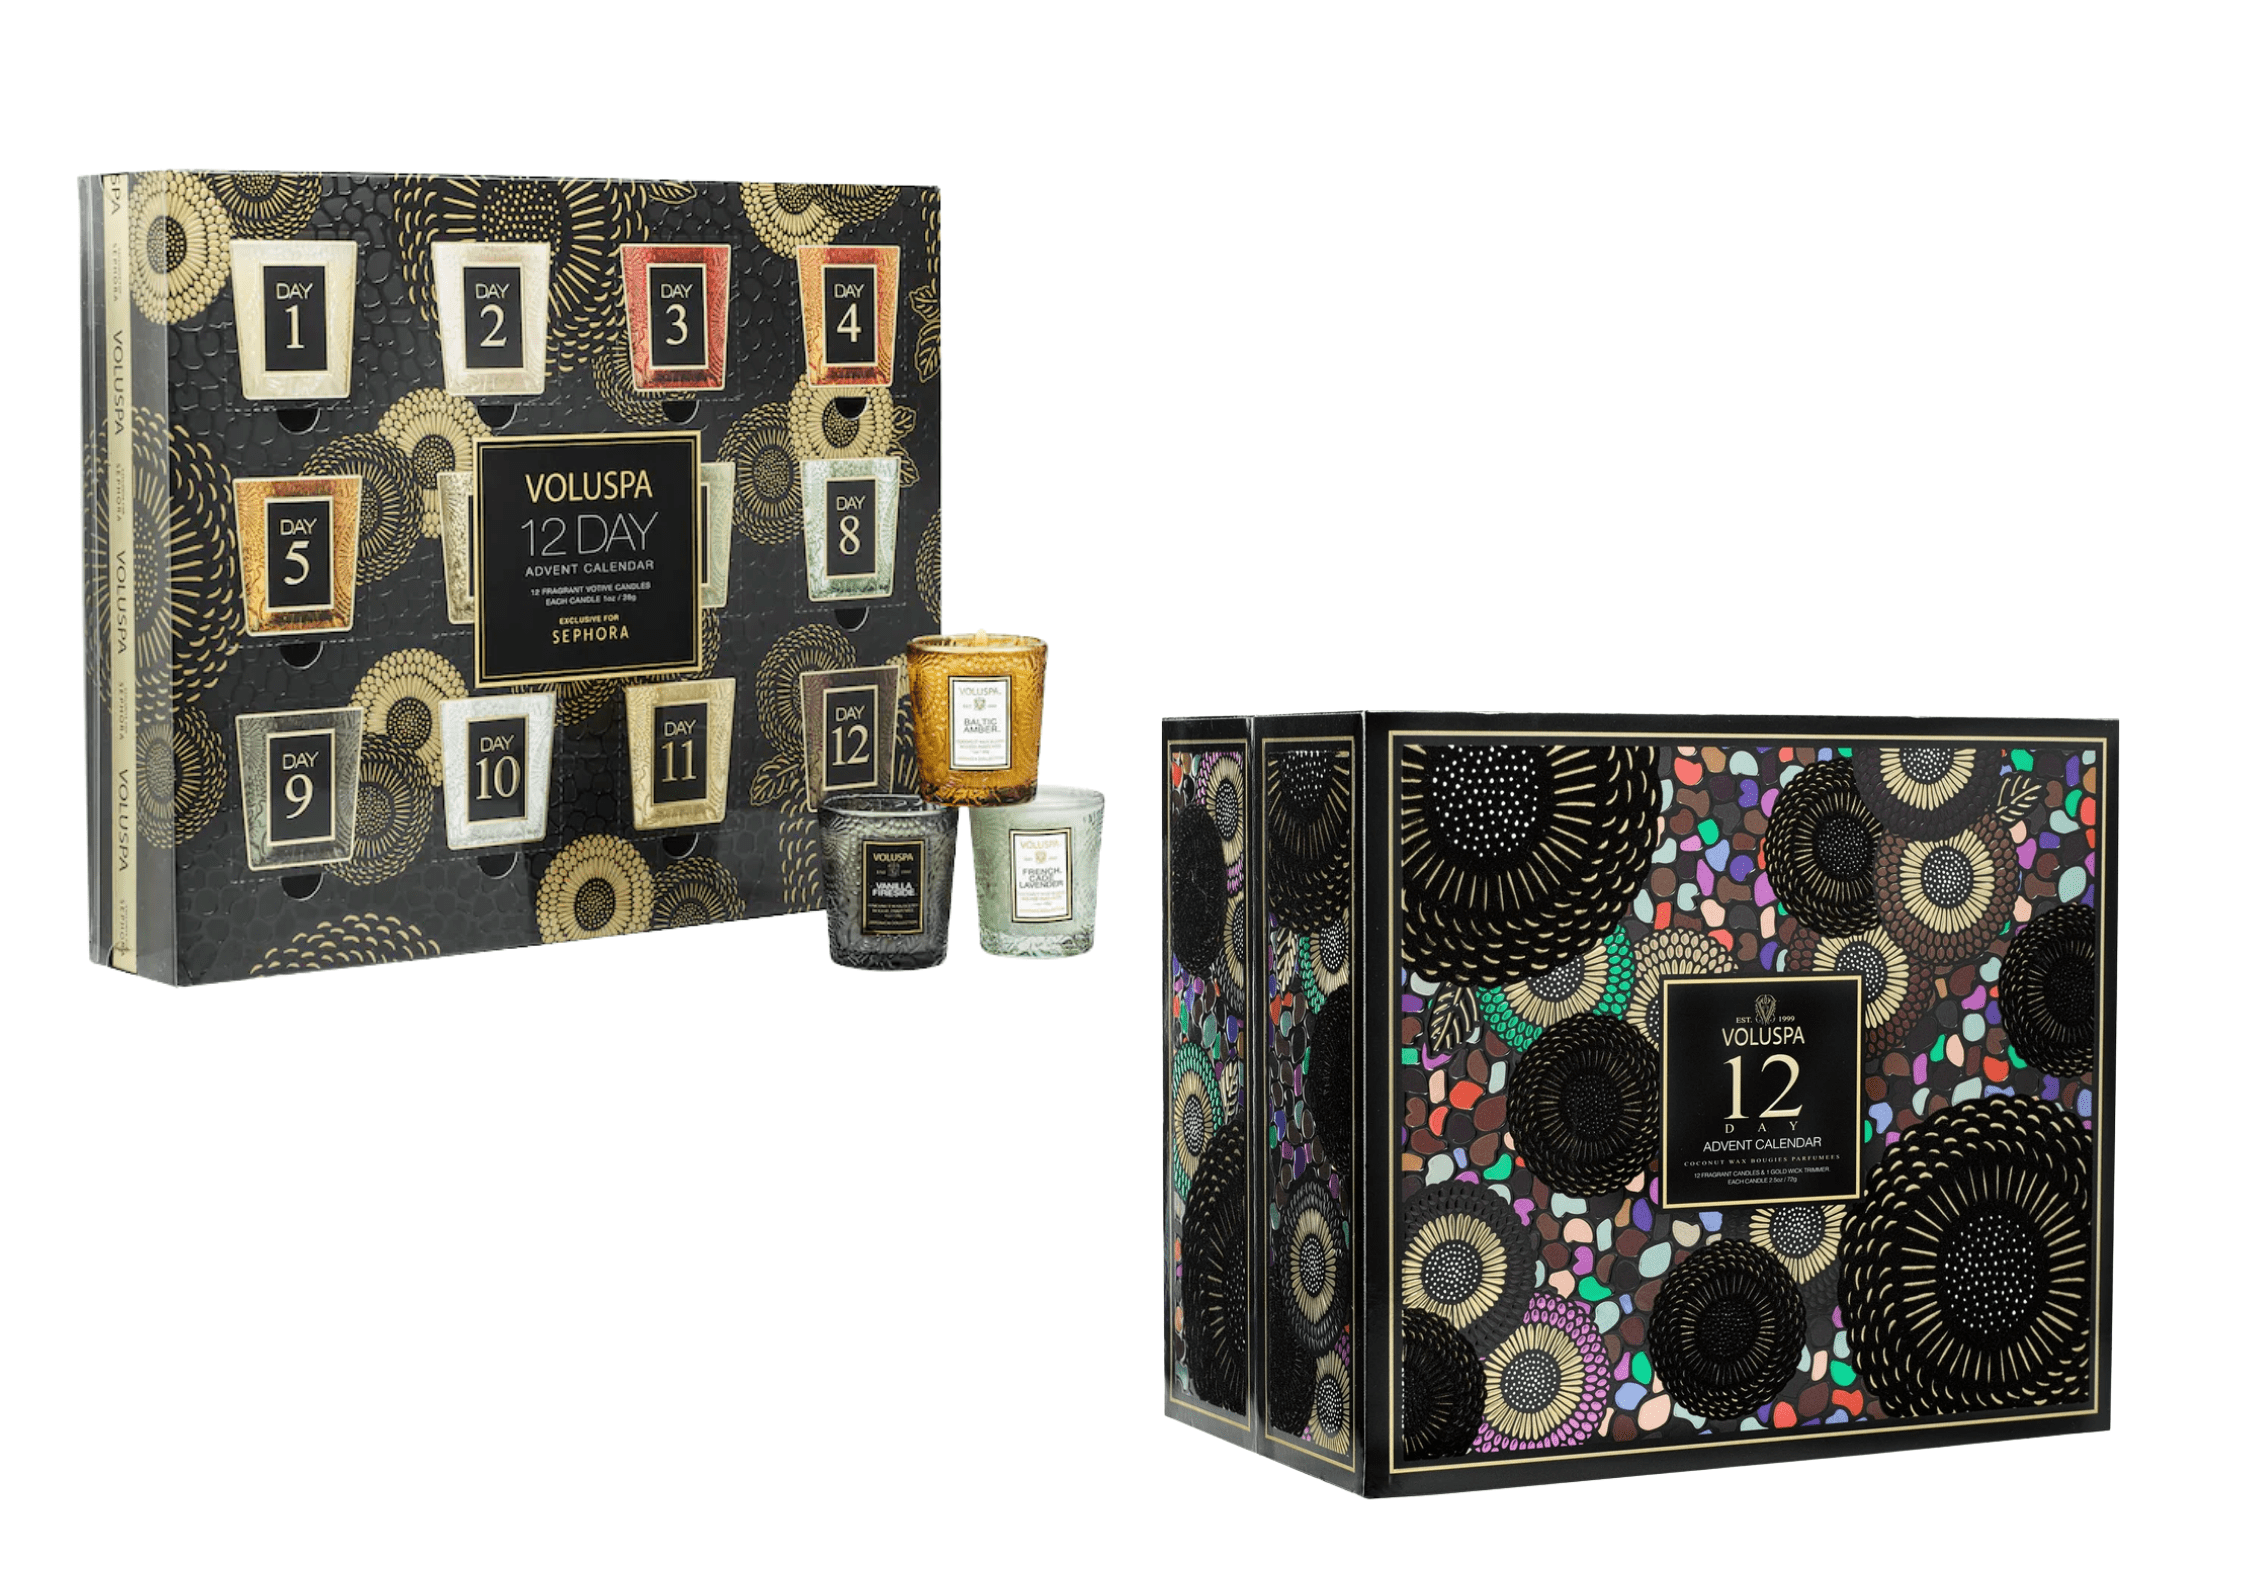 2021 Voluspa Advent Calendars Are Here 12 Days of Daily Indulgence